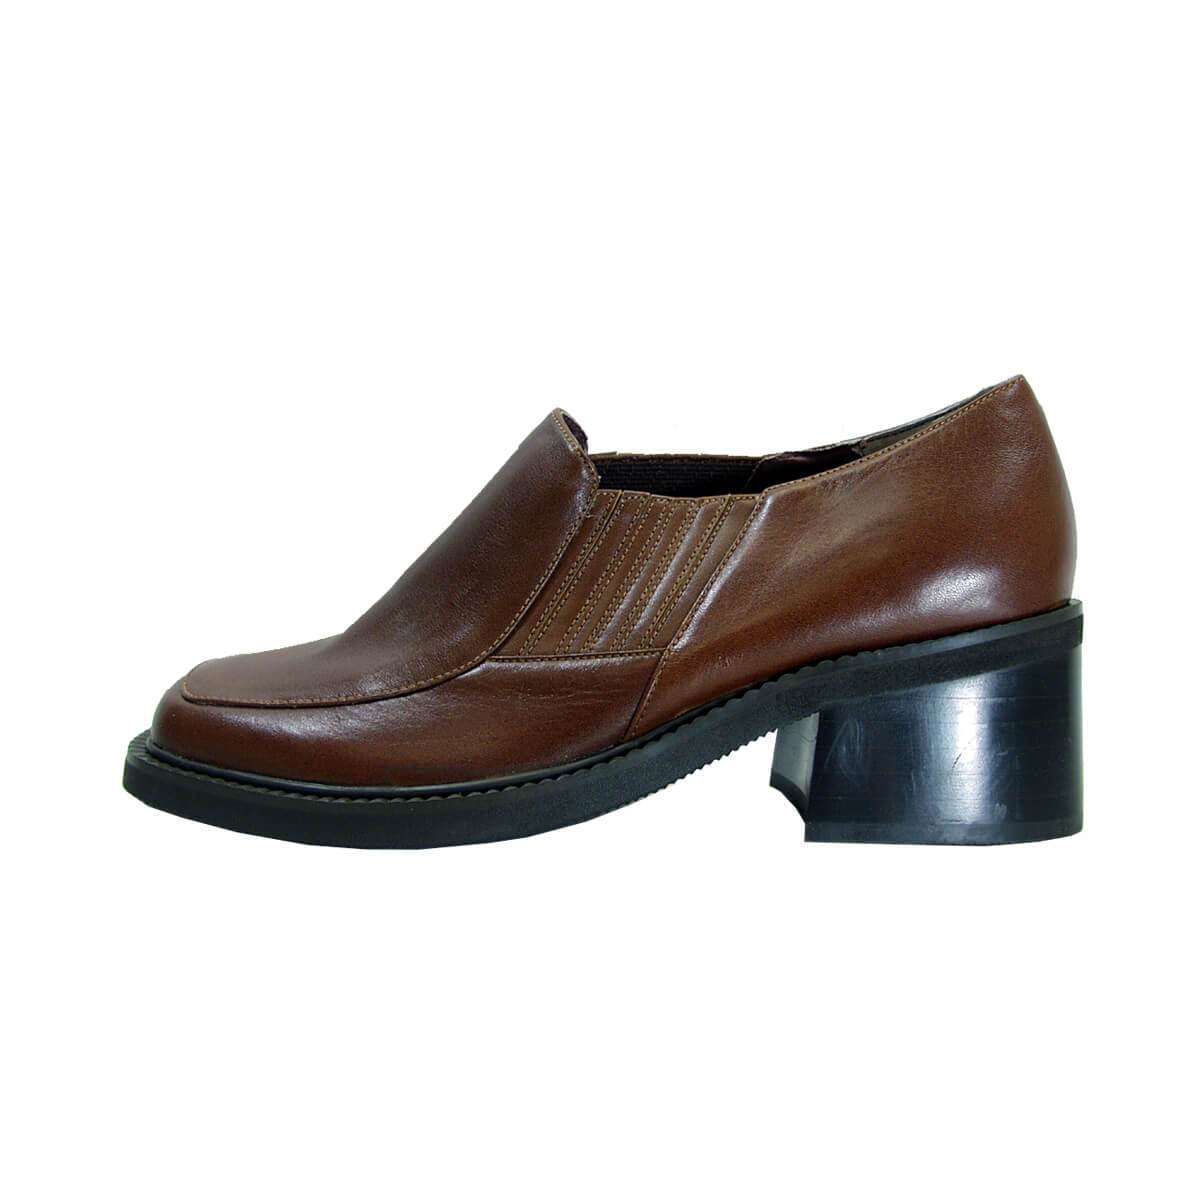 PEERAGE Channelle Women's Wide Width Casual Leather Shoes